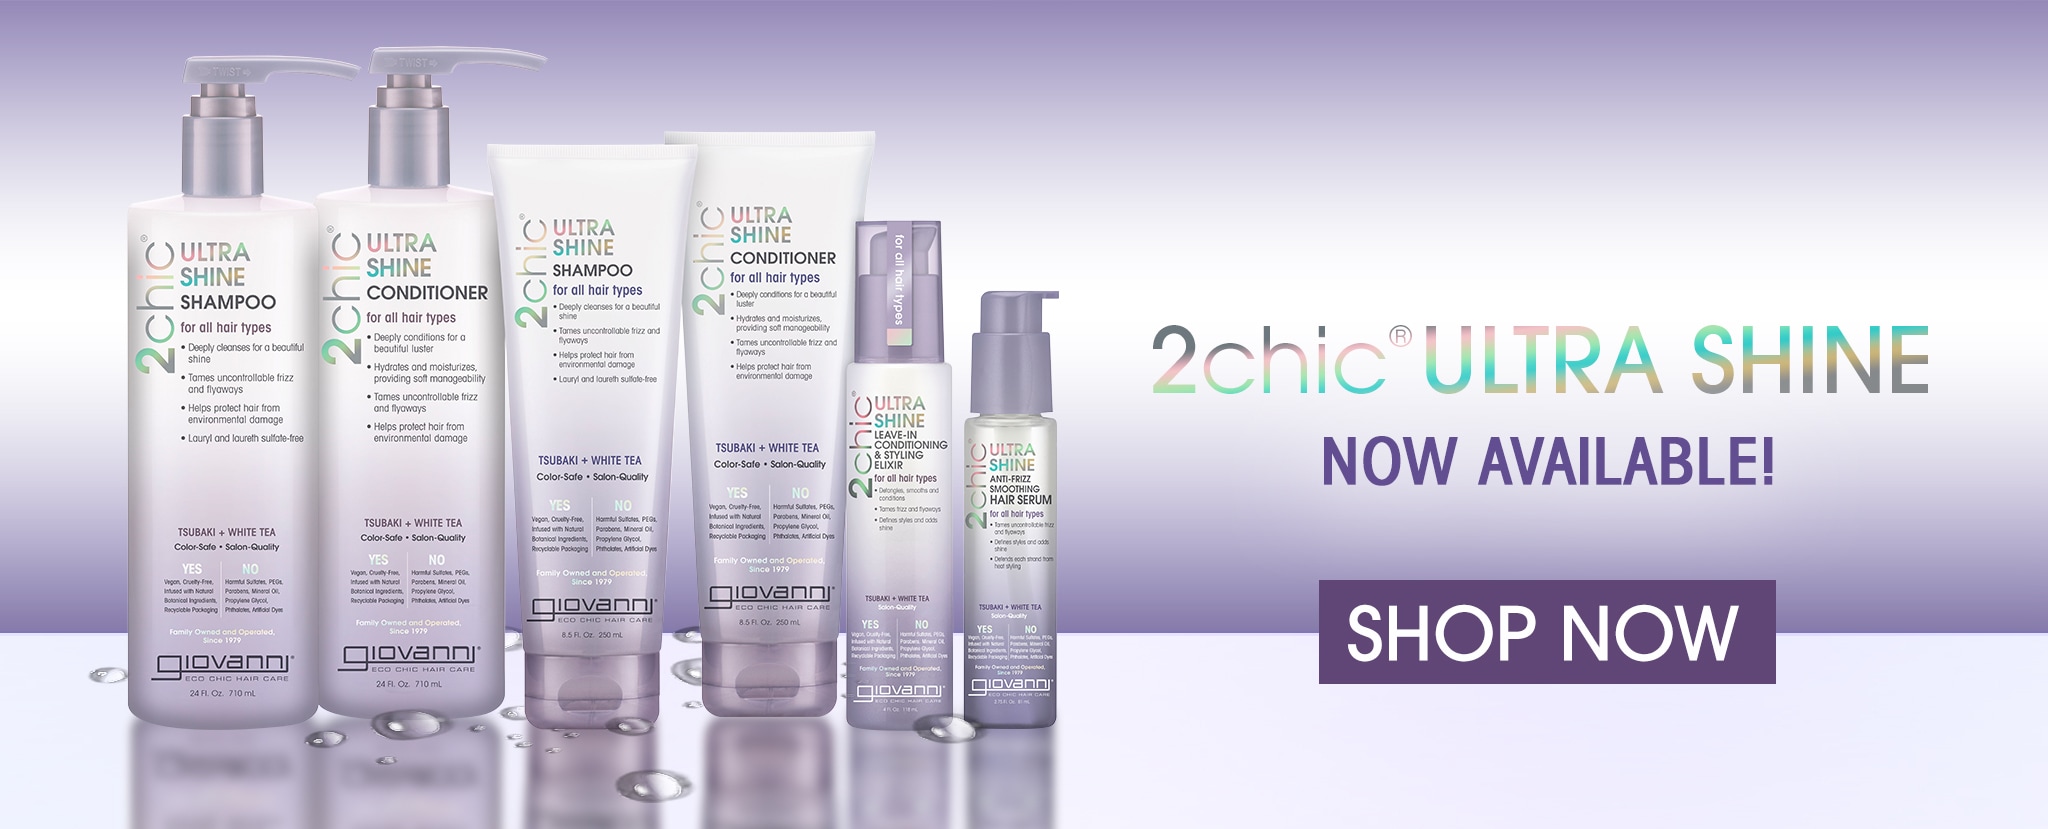 2chic Ultra Shine - Now Available